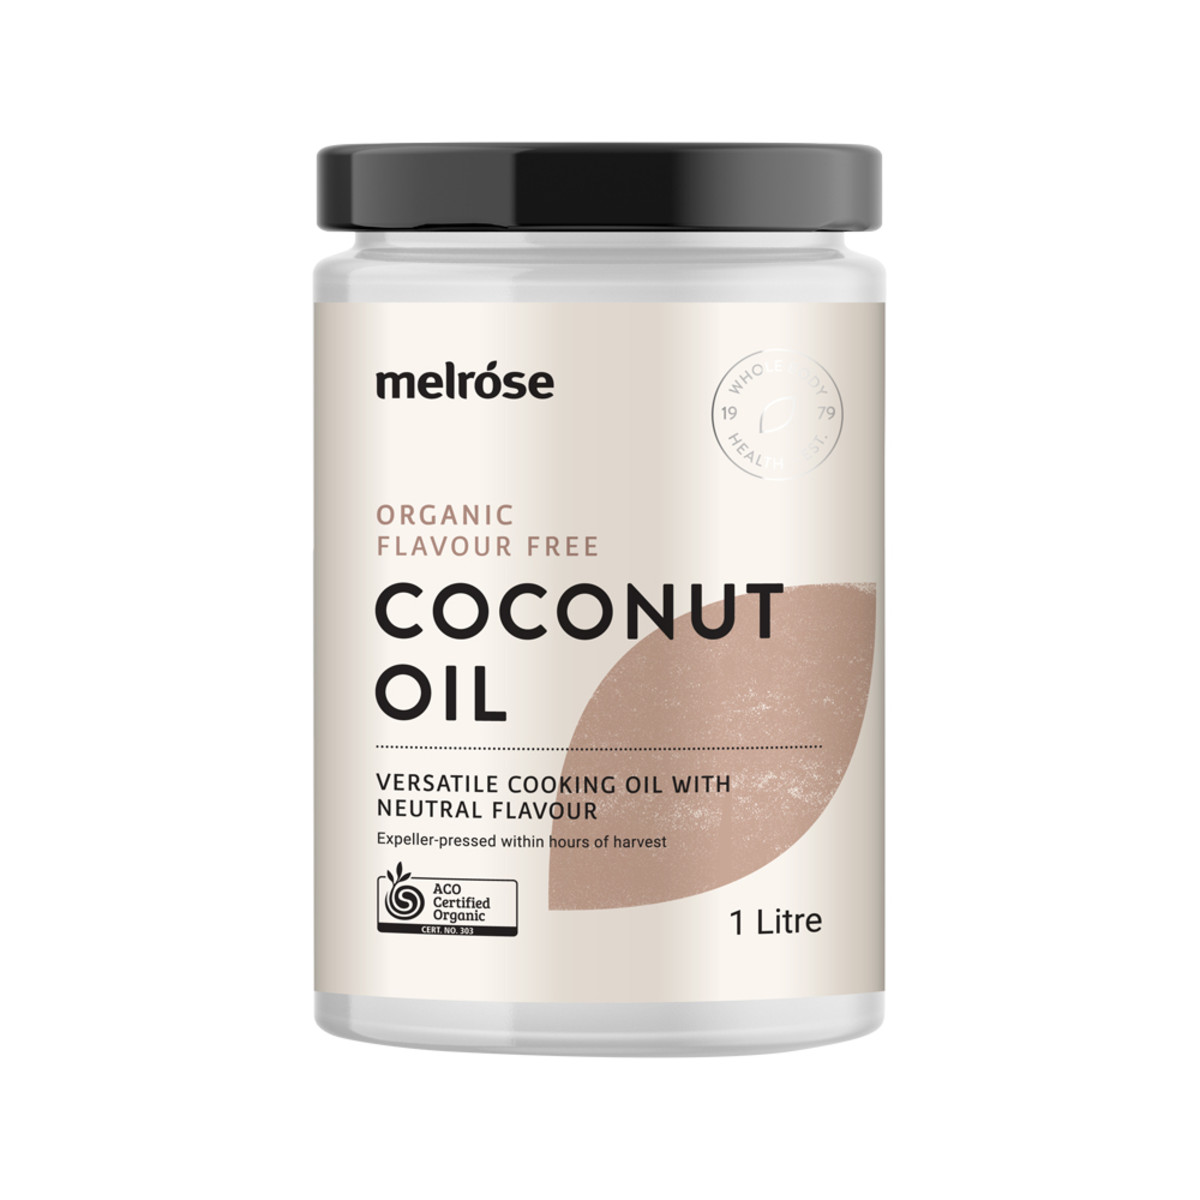 MELROSE - Organic Coconut Oil Flavour Free